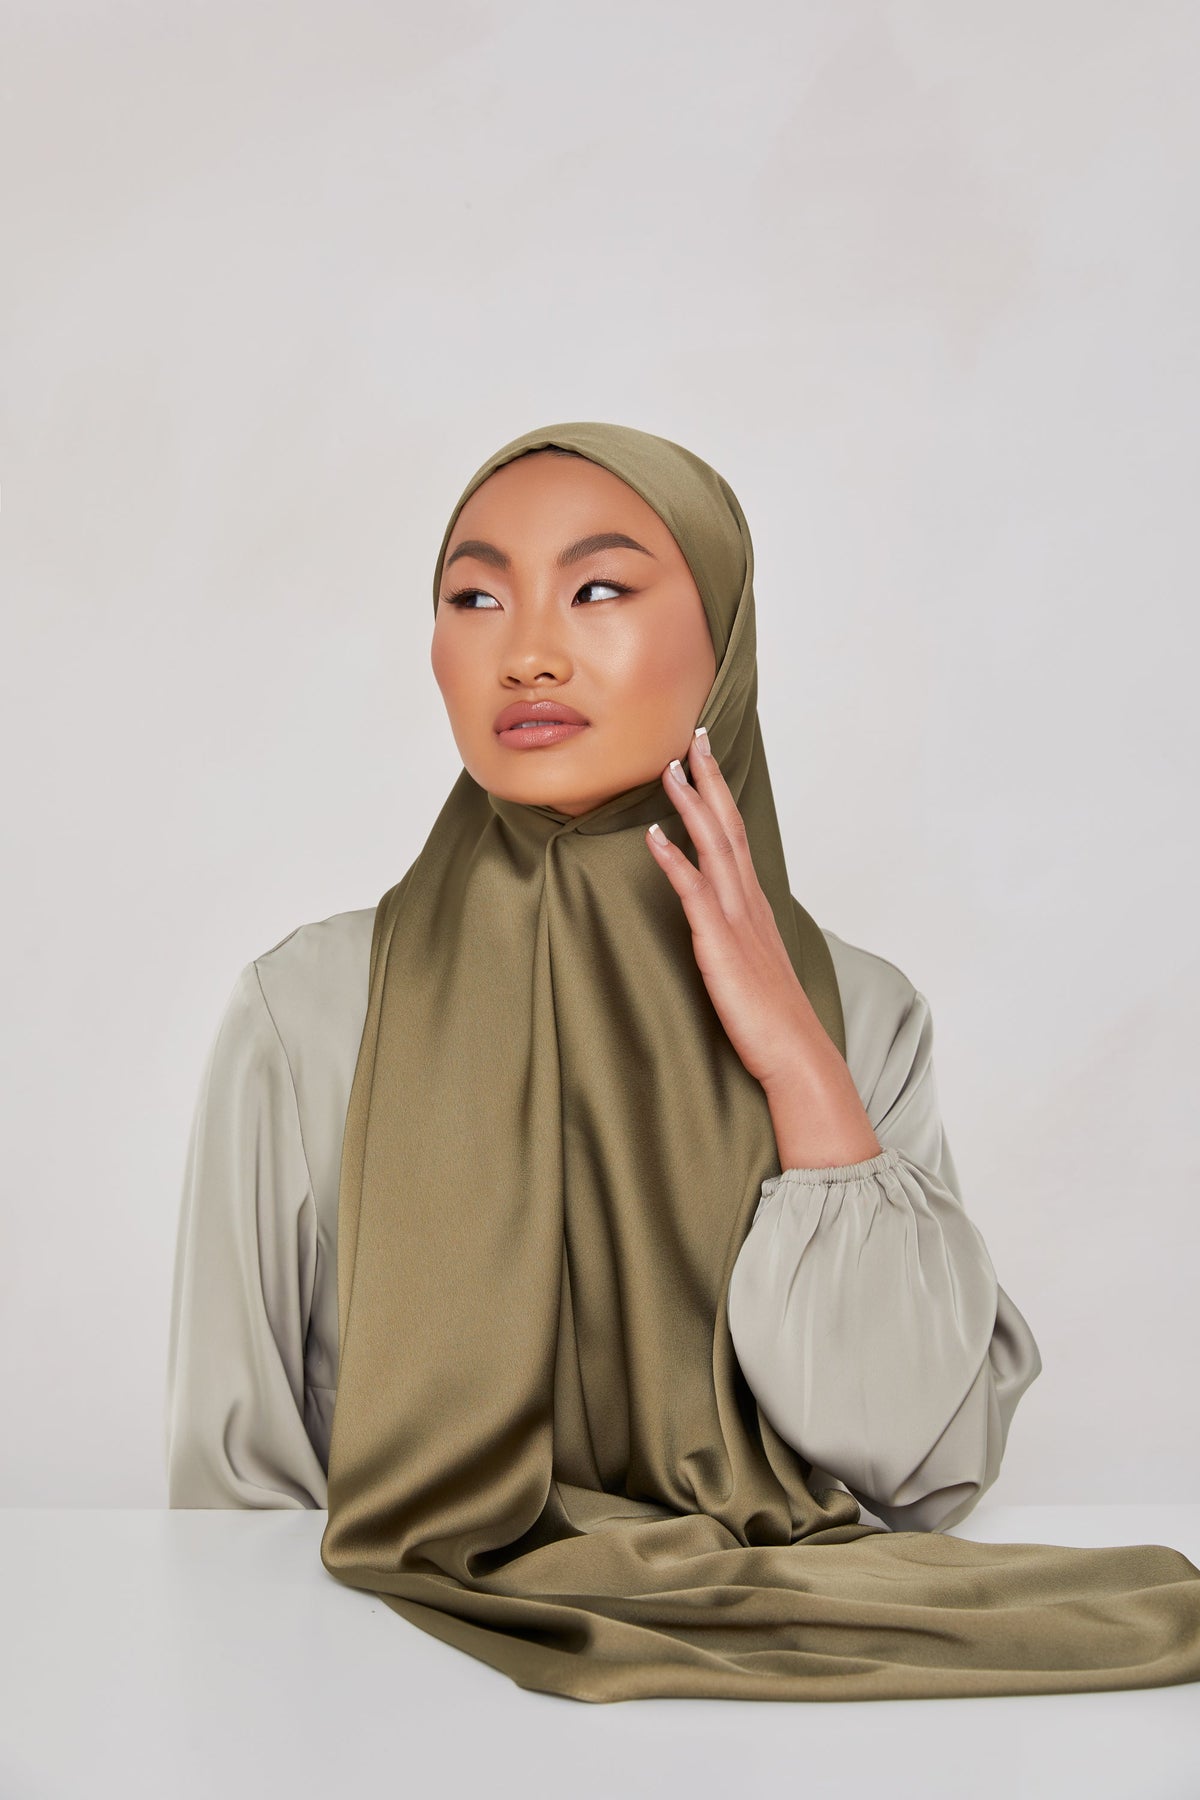 TEXTURE Satin Hijab - Grounded epschoolboard 